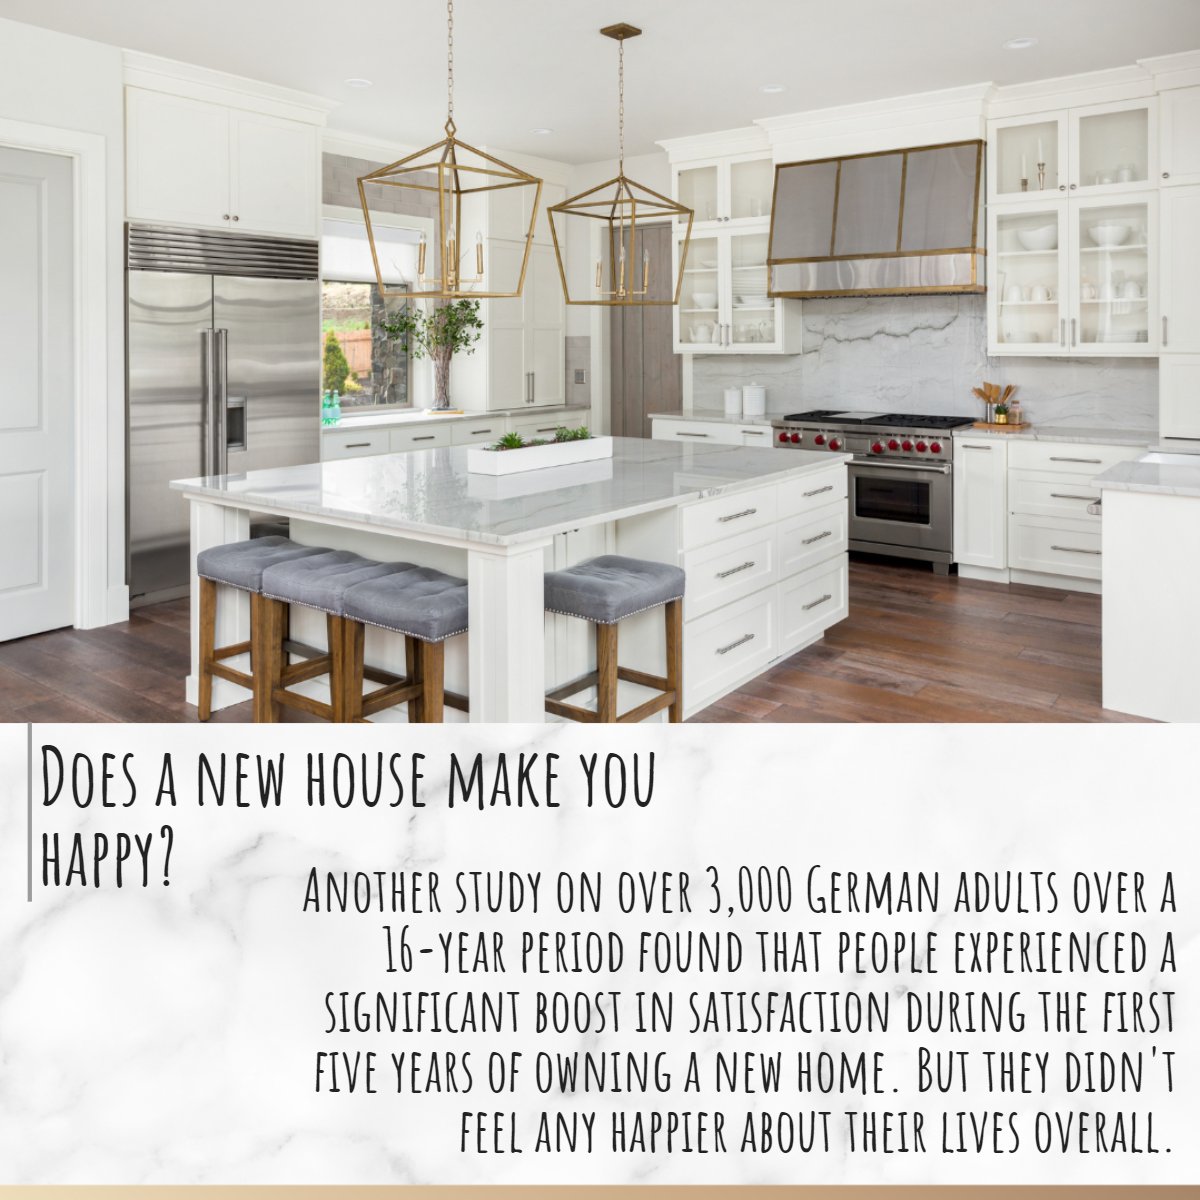 Do you think a new home can make you happy?

Share your thoughts!

#newhome #funfact
 #TheFryGroup #IknowRealEstate #TwinCitiesRealEstate #LocalExpert